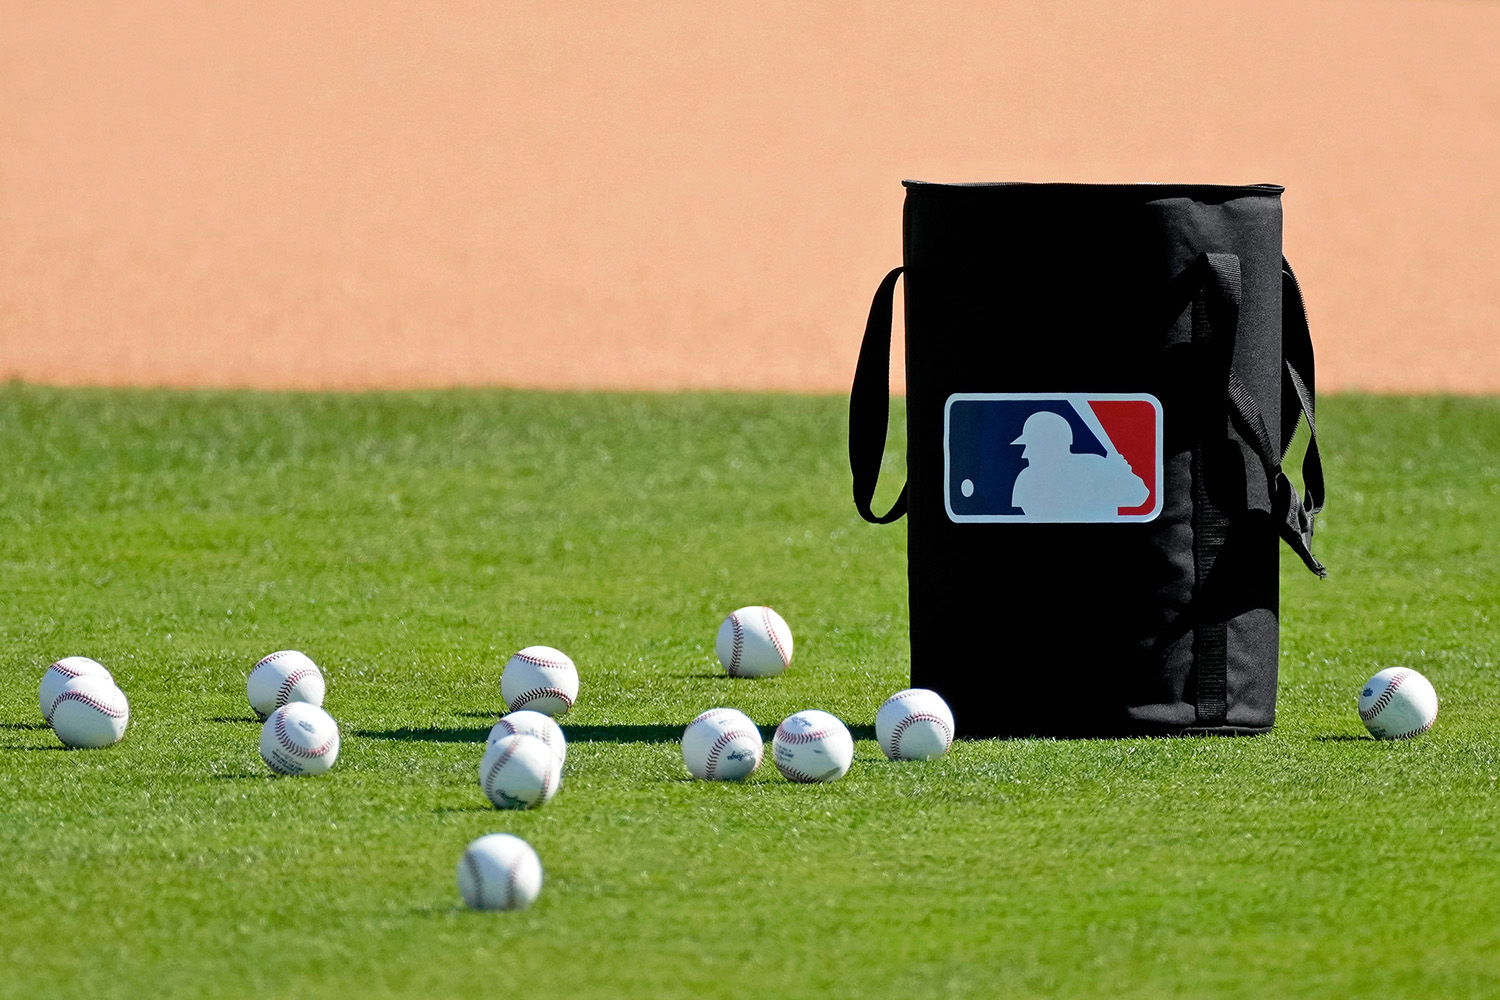 MLB Seeking to Add Local Games to Streaming Service